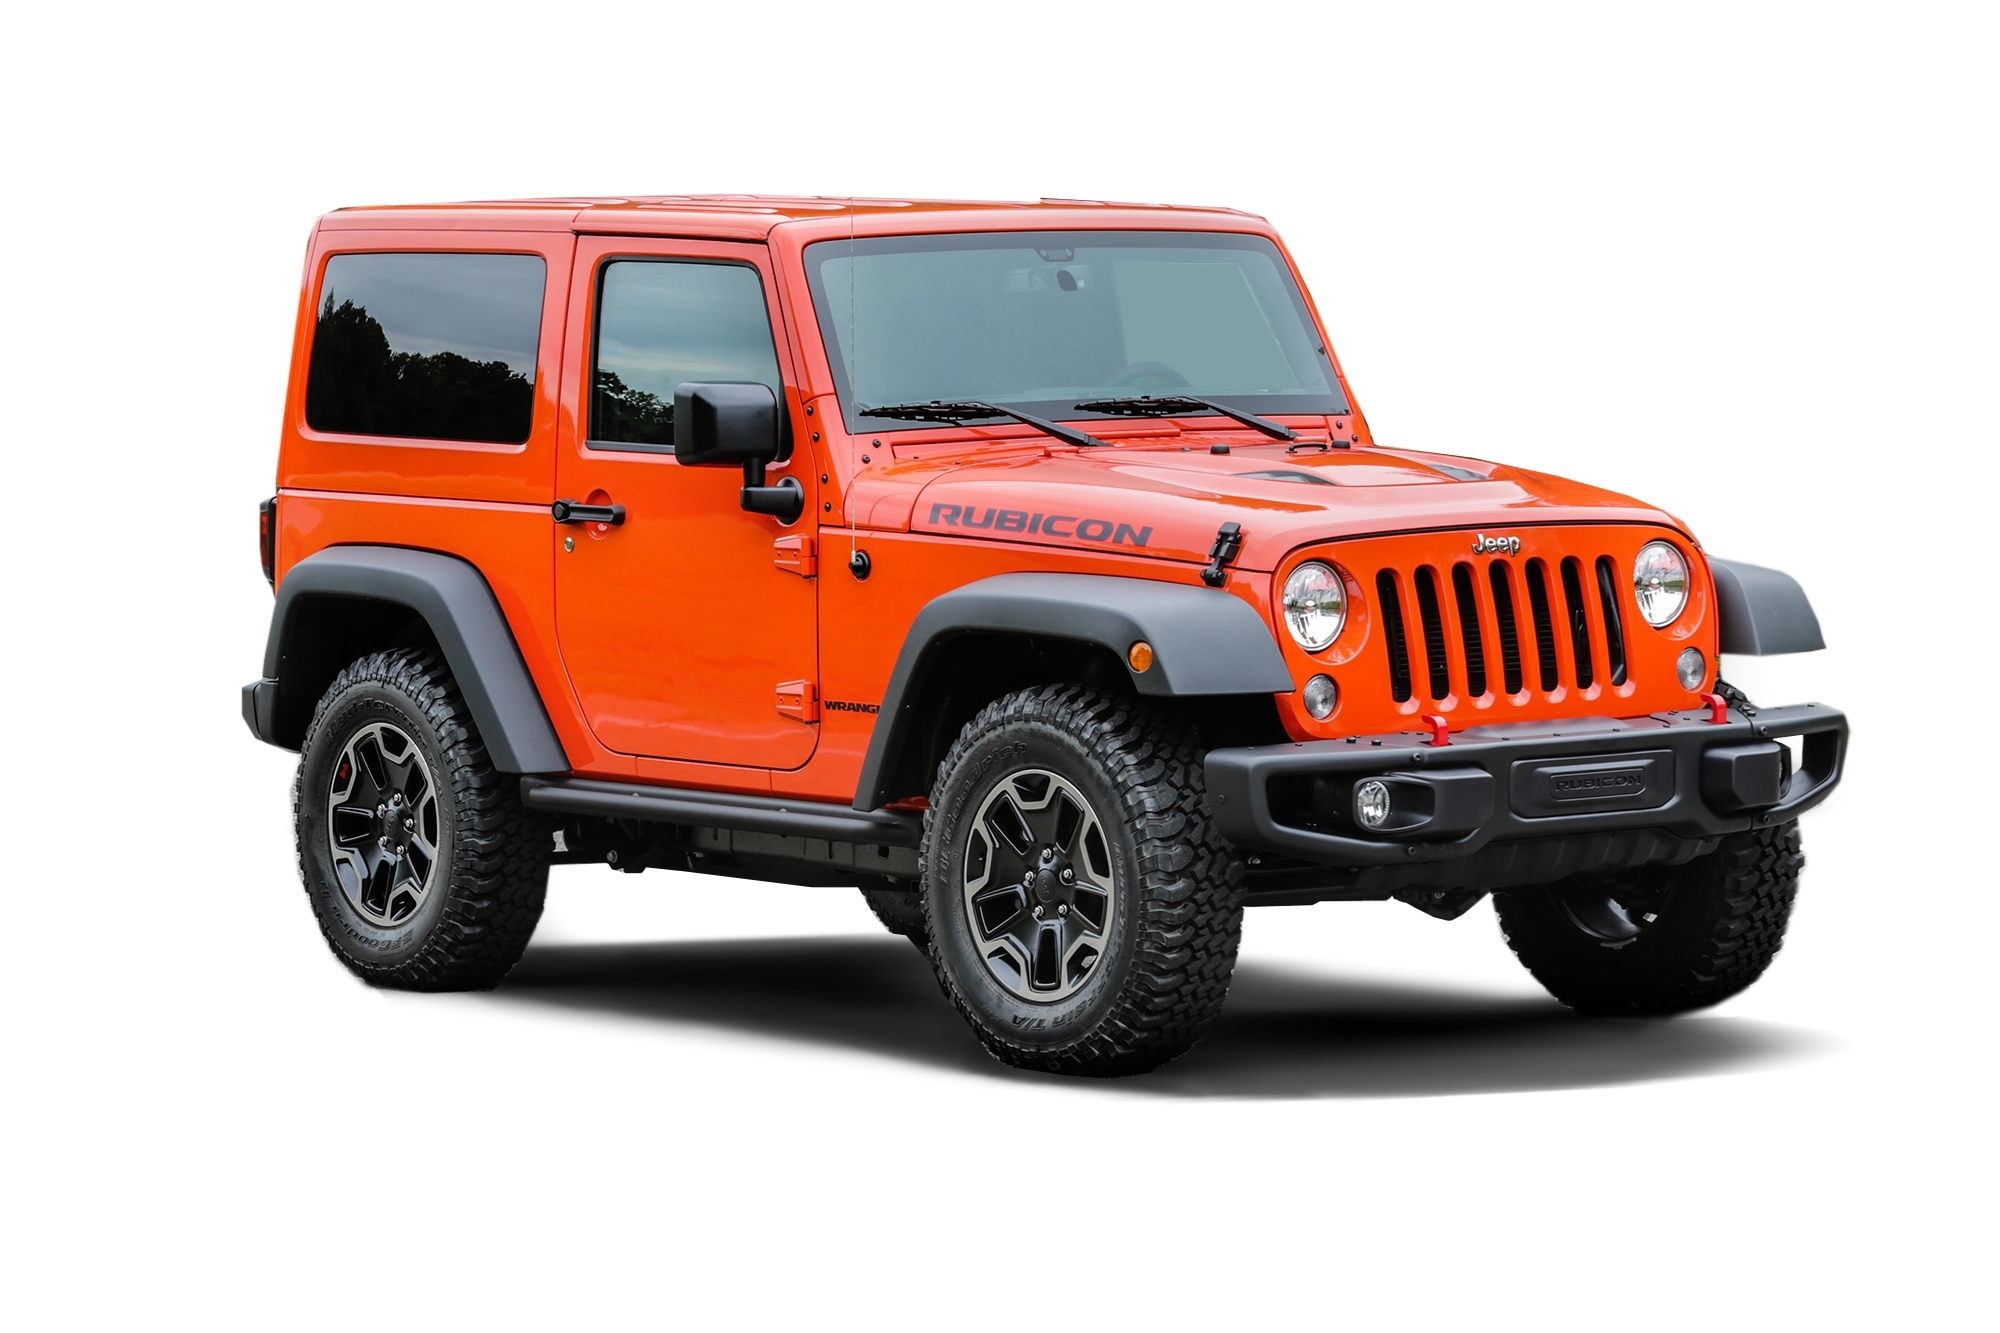 2016 Jeep Wrangler 75th Anniversary Full Specs, Features and Price | CarBuzz